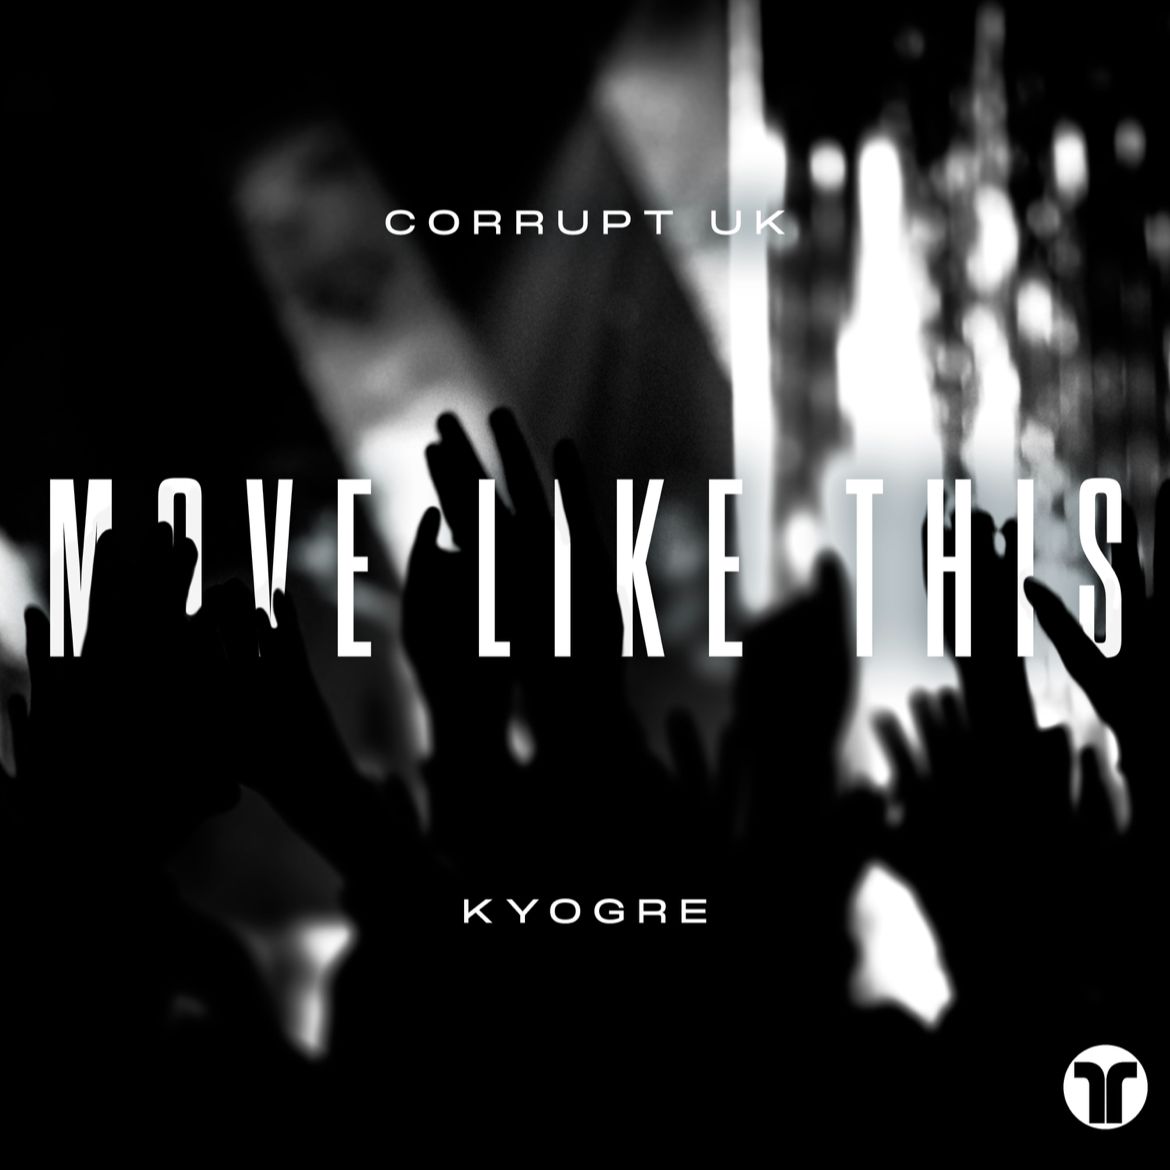 I-download Corrupt (UK) & Kyogre - Move Like This